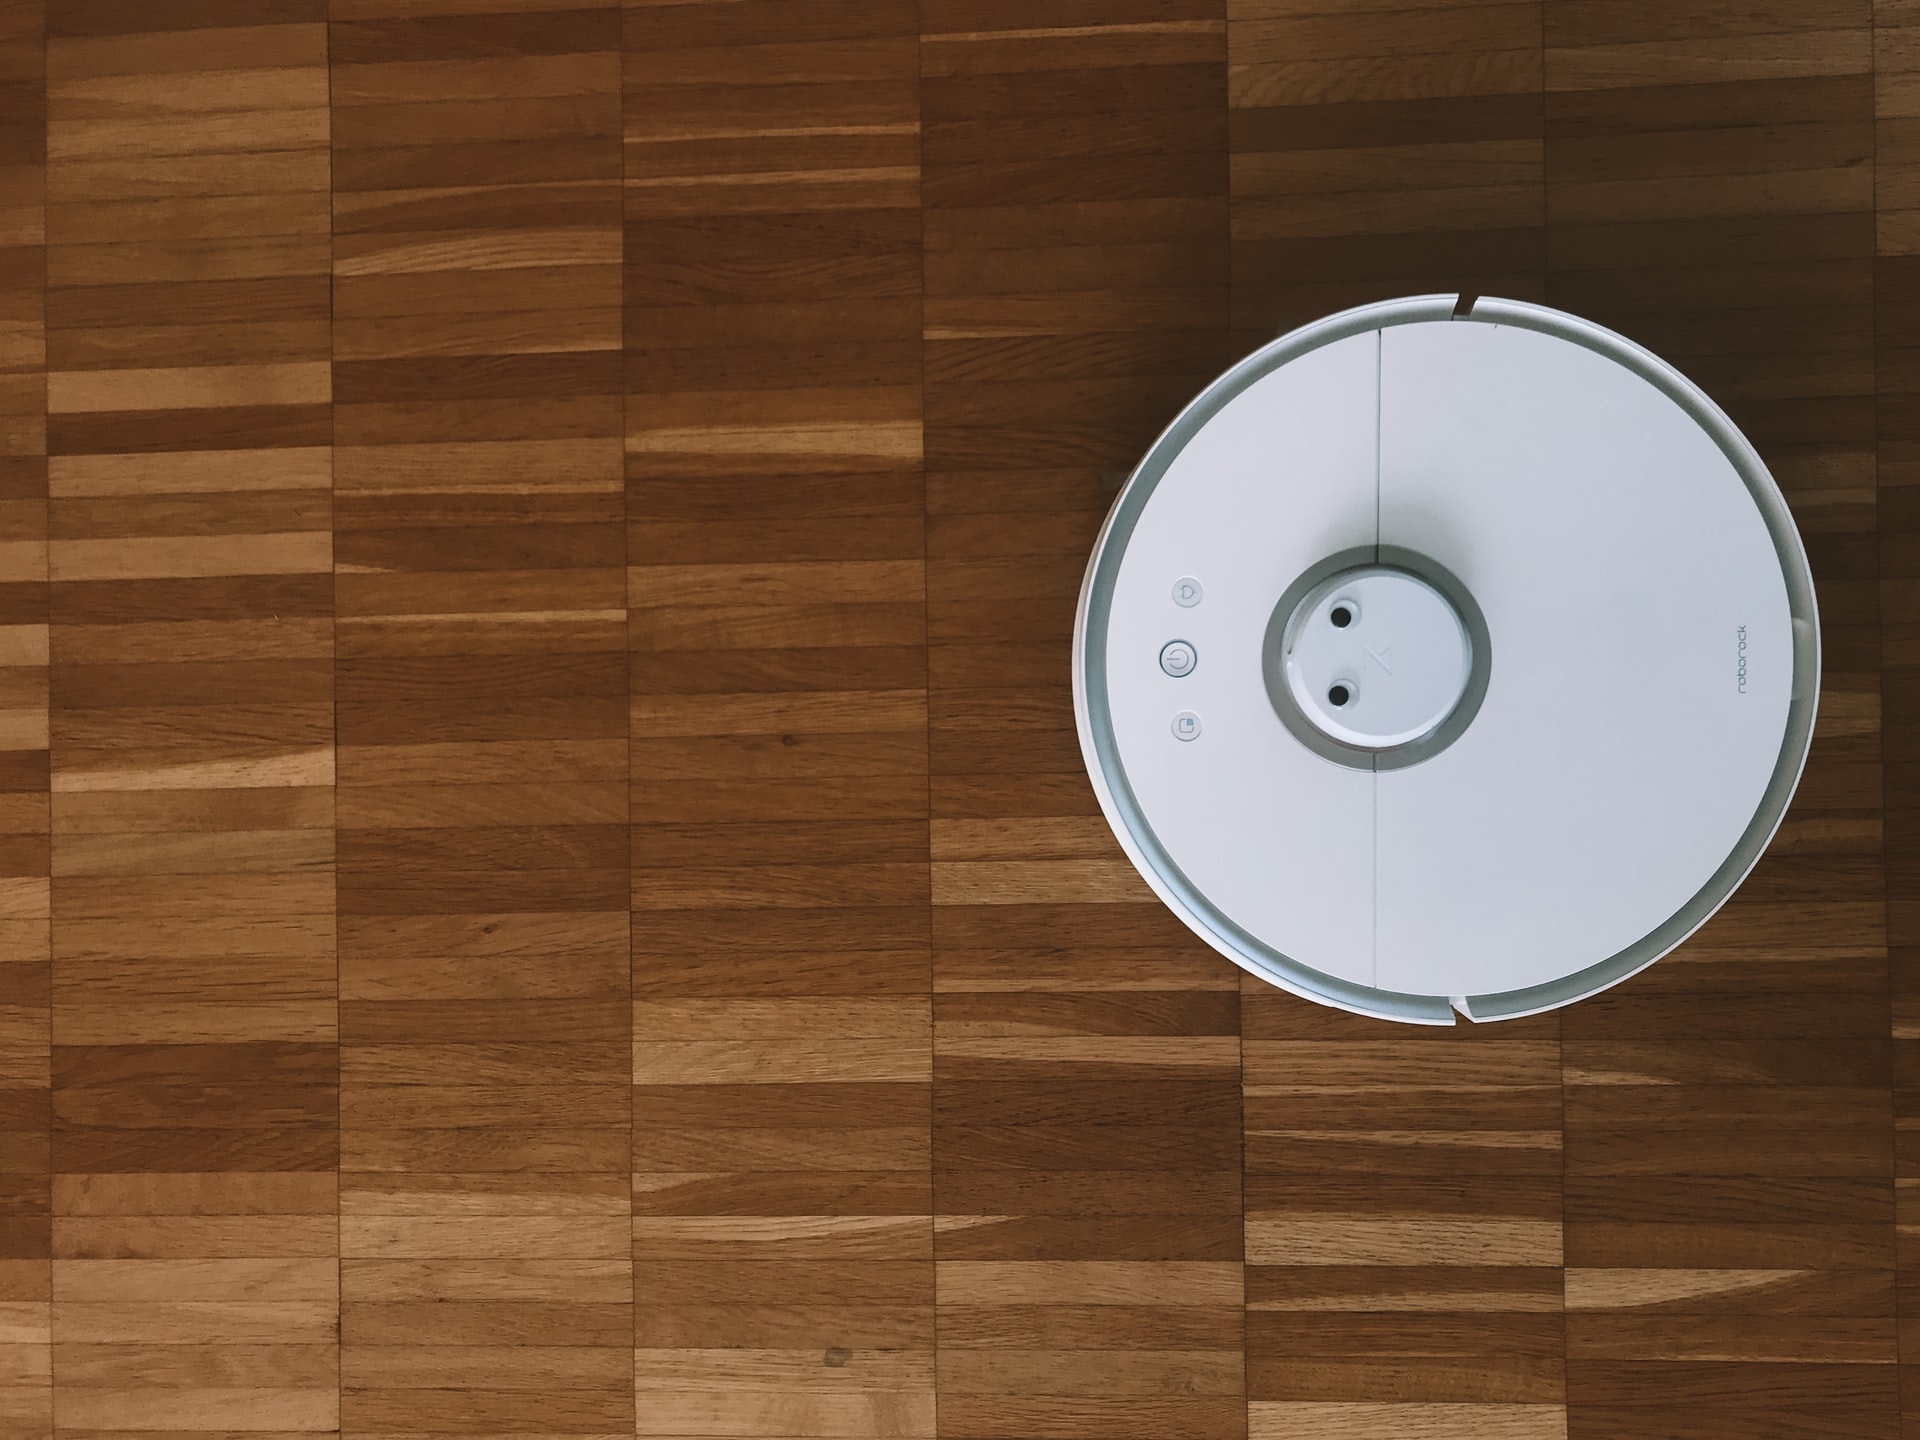 A white Robot Roomba vacuum cleaner on wood floor